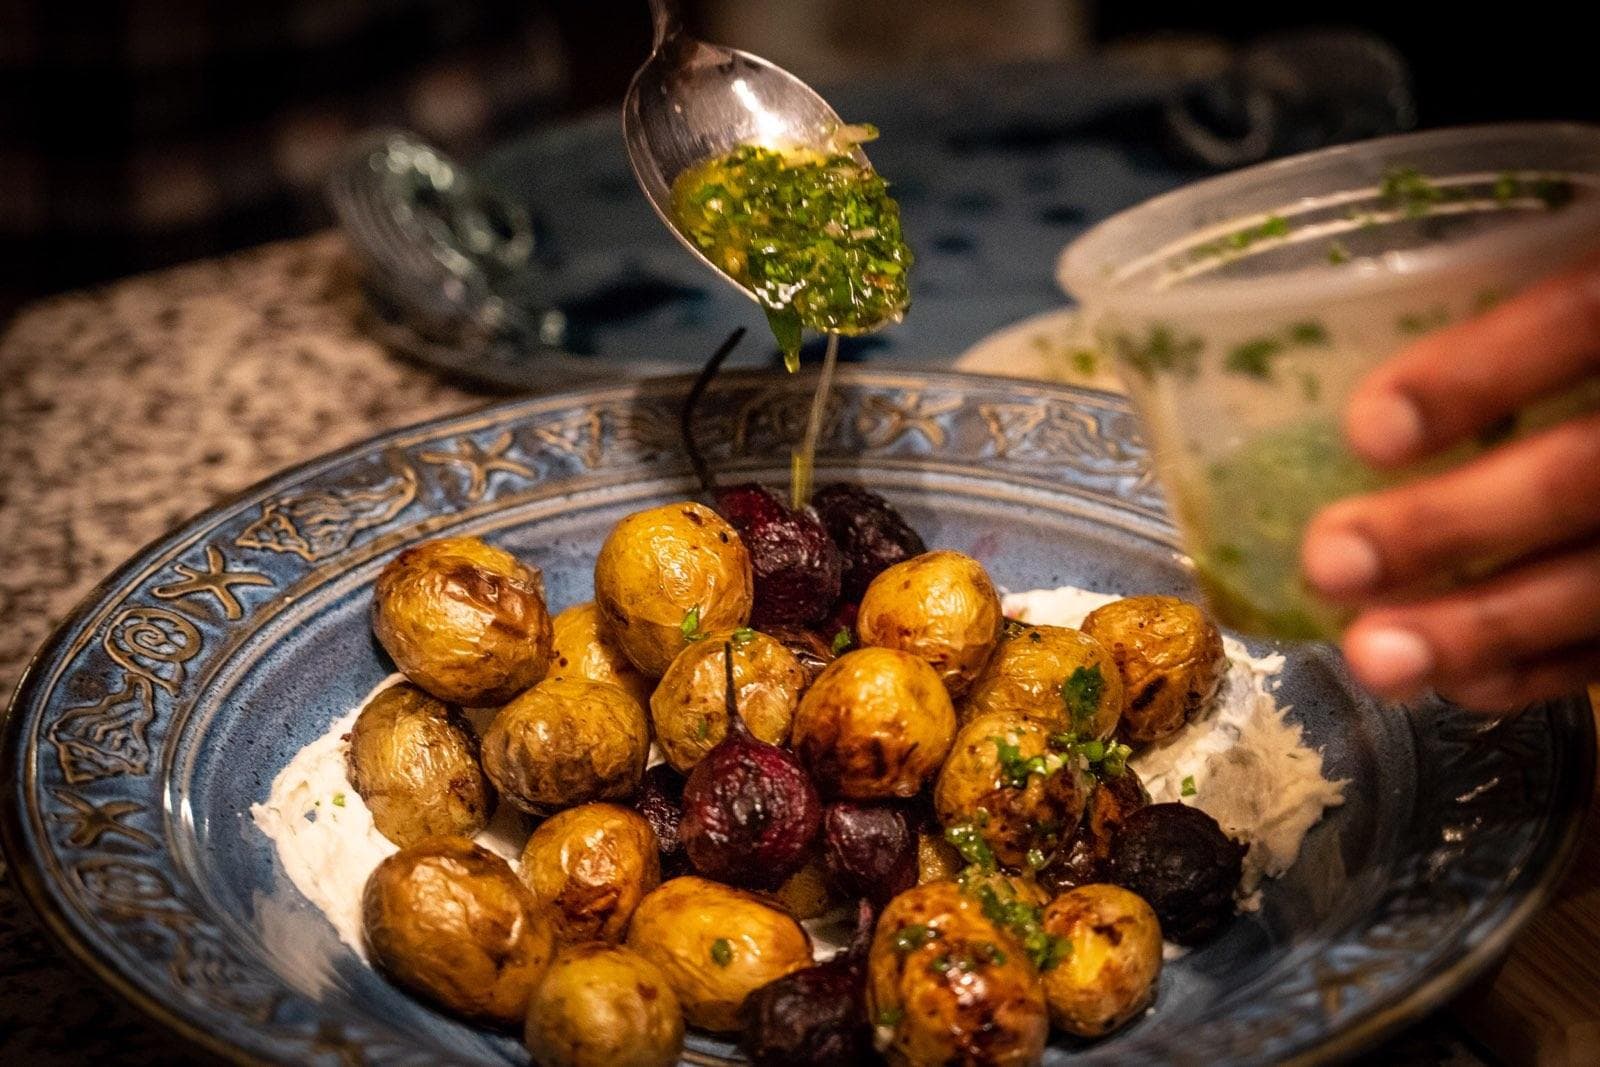 Blistered baby potatoes and beets cooked by Dope Dinners. The roasted baby Russian potatoes and baby beets are served with a medicated honey-whipped ricotta. (Courtesy)